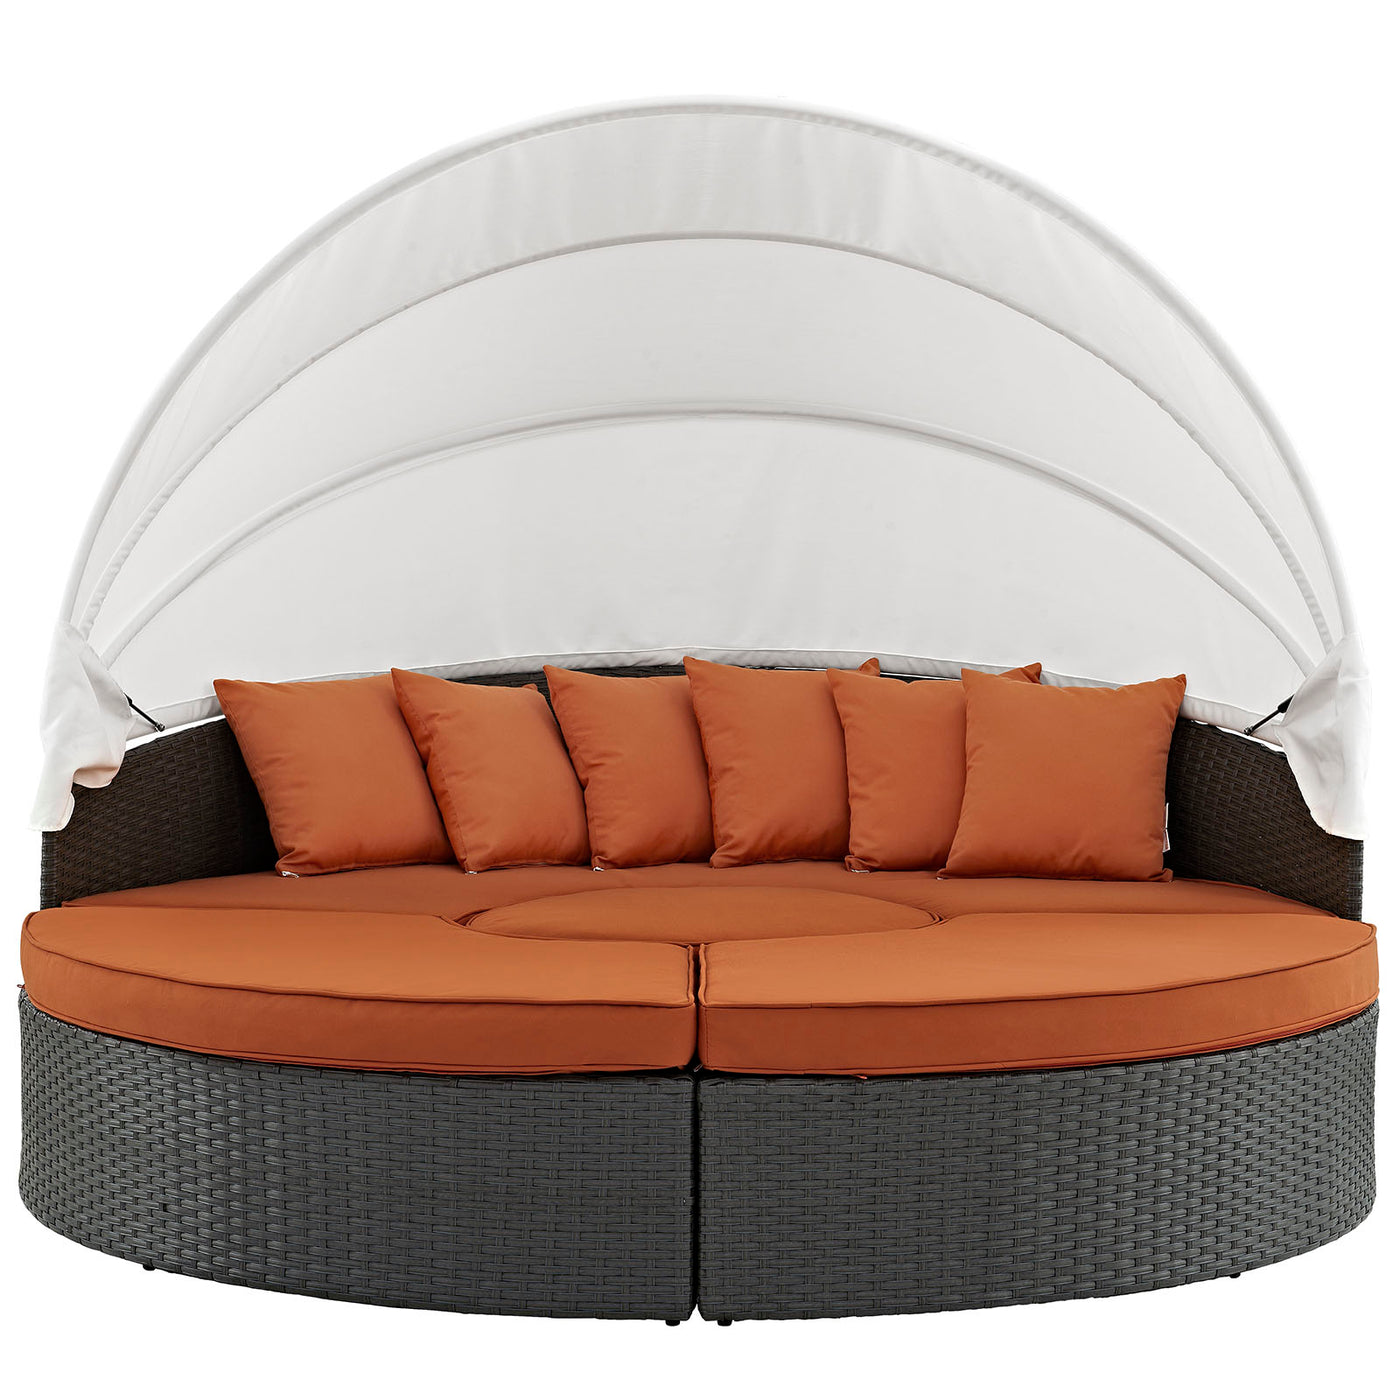 Sojourn Outdoor Patio Sunbrella® Daybed